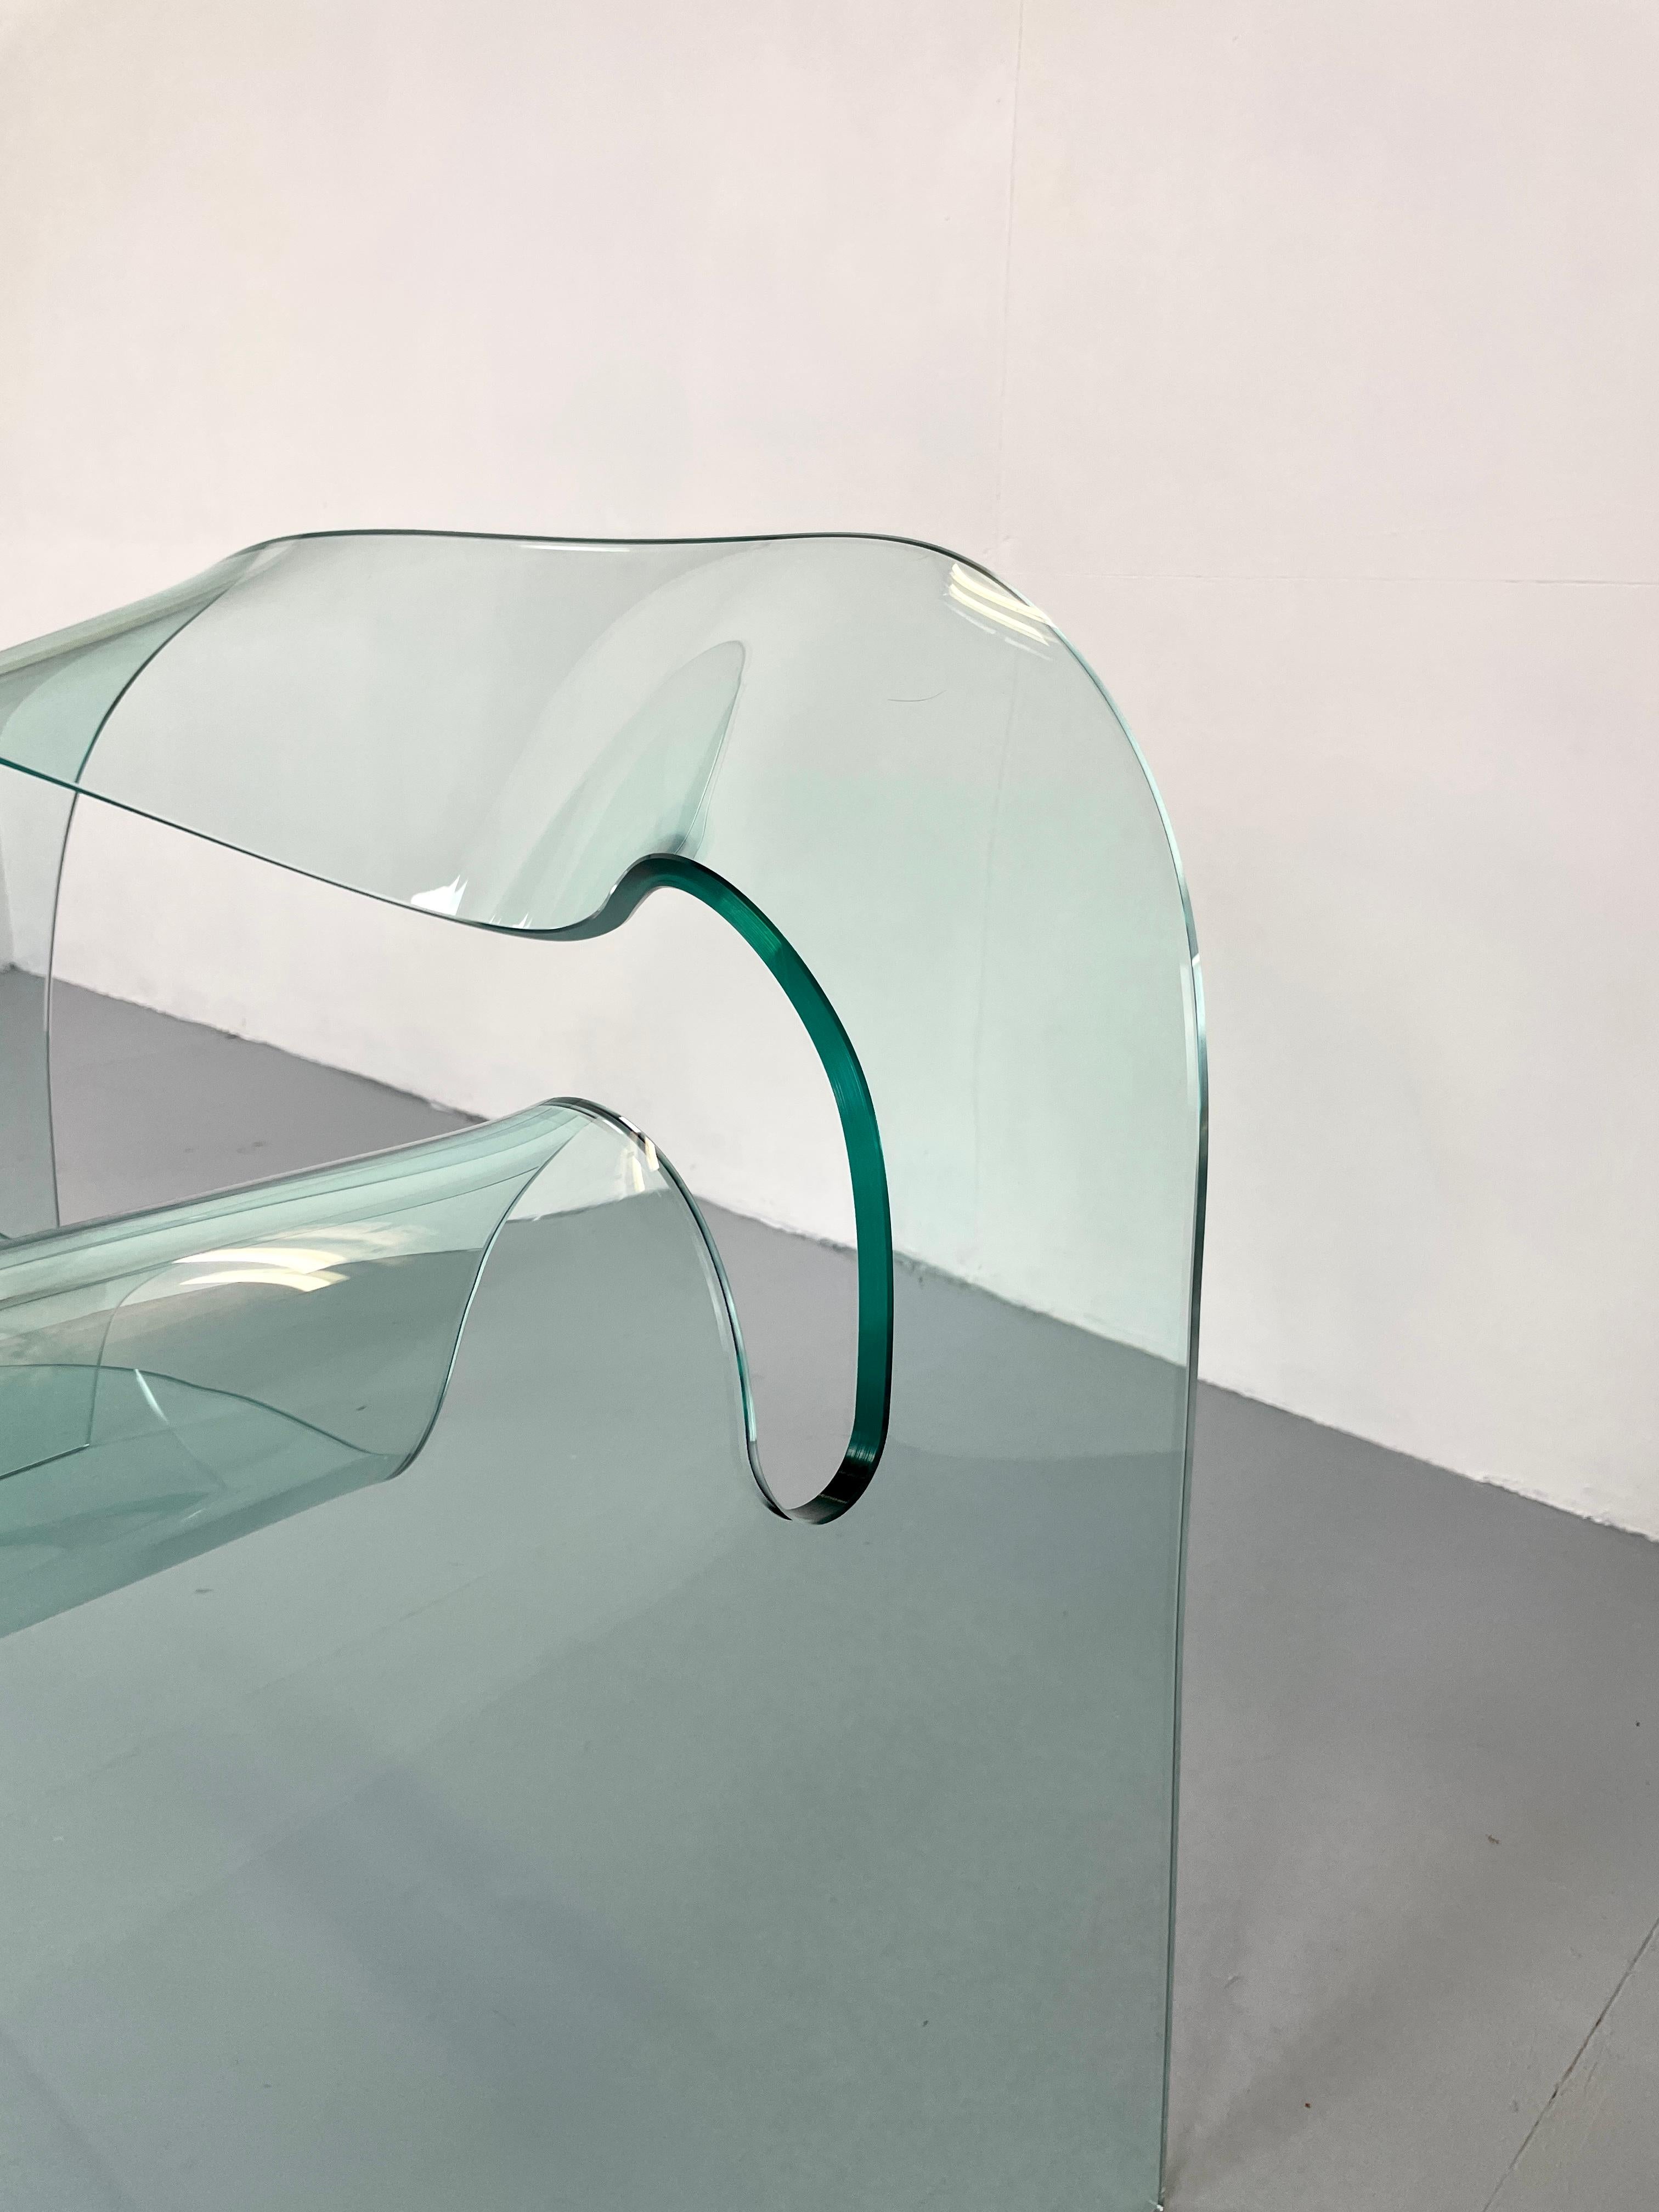 Wonderfull and rare authentic Ghost Chair by Cini Boeri for Fiam. 

It is stunning how a chair full of glass could be manufactured and used as a seating. 

“ I would never have thought of making a chair from glass… My initial distrust of an idea